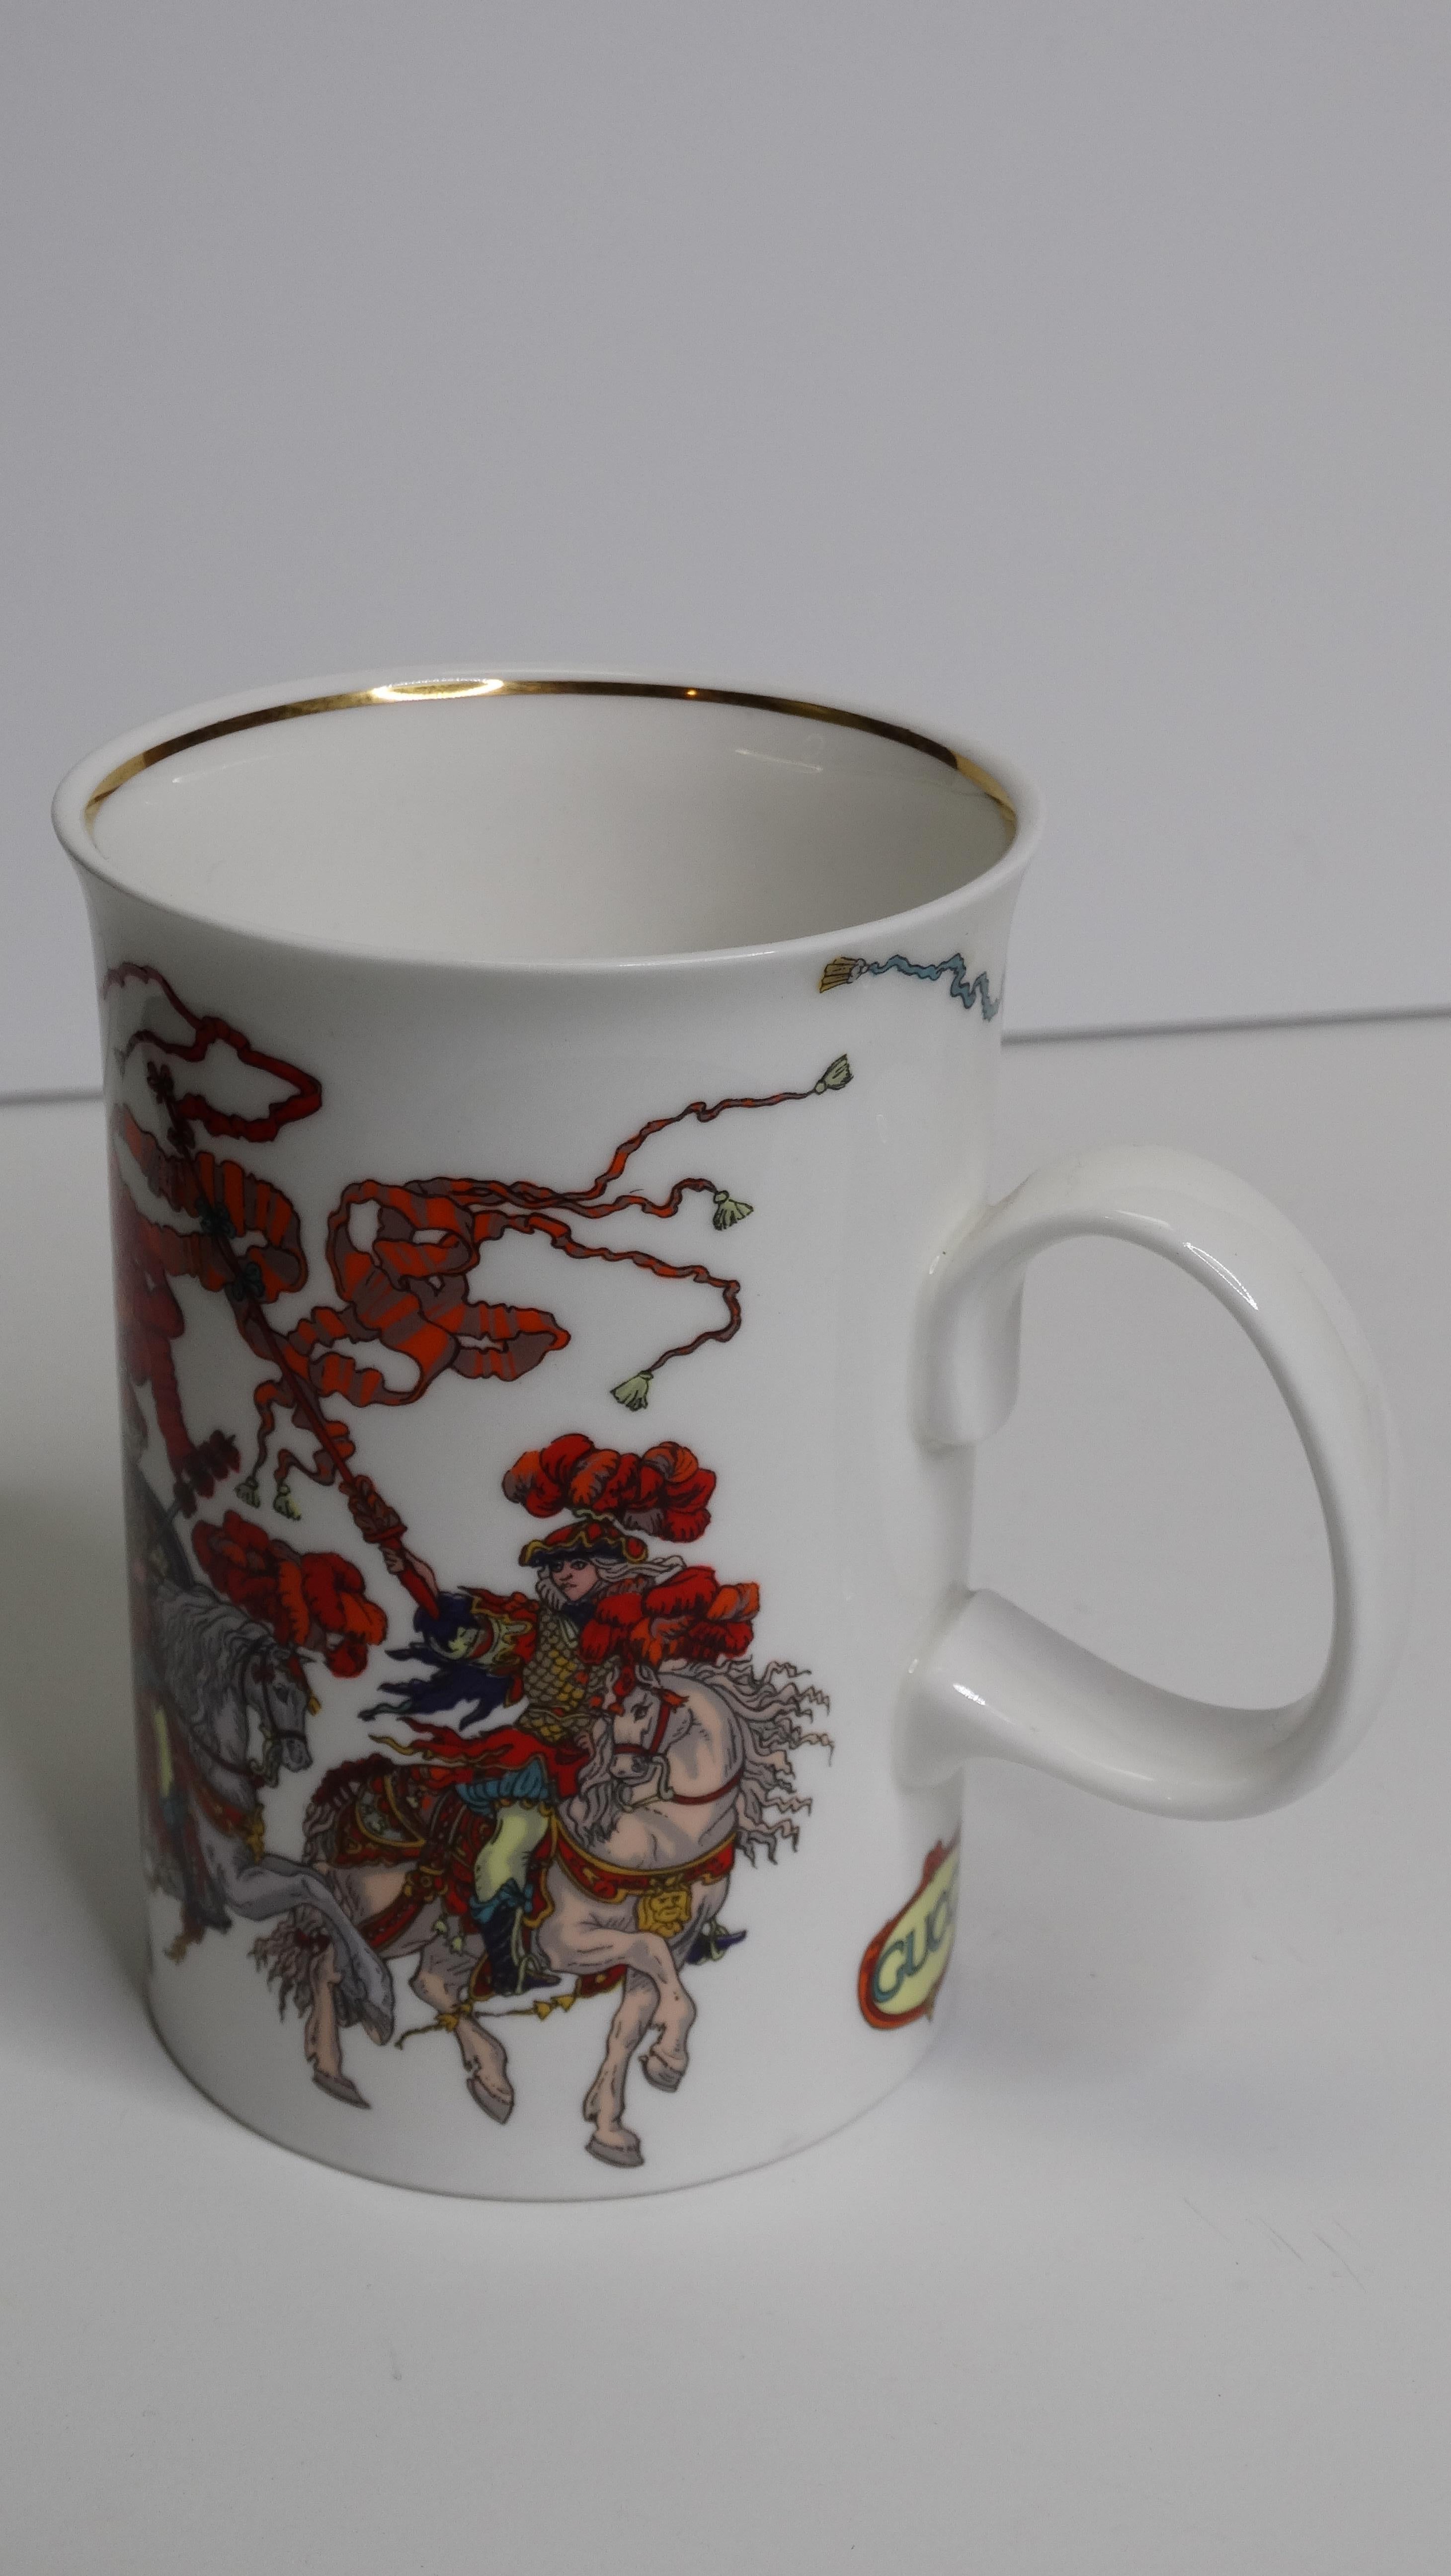 Did someone say Gucci? Snag this one of a kind mug for your next early morning coffee or tea! Trust me, coffee tastes better in fine Gucci. If you don't feel like making this your new everyday mug, mix-and-match this Gucci mug with other Gucci